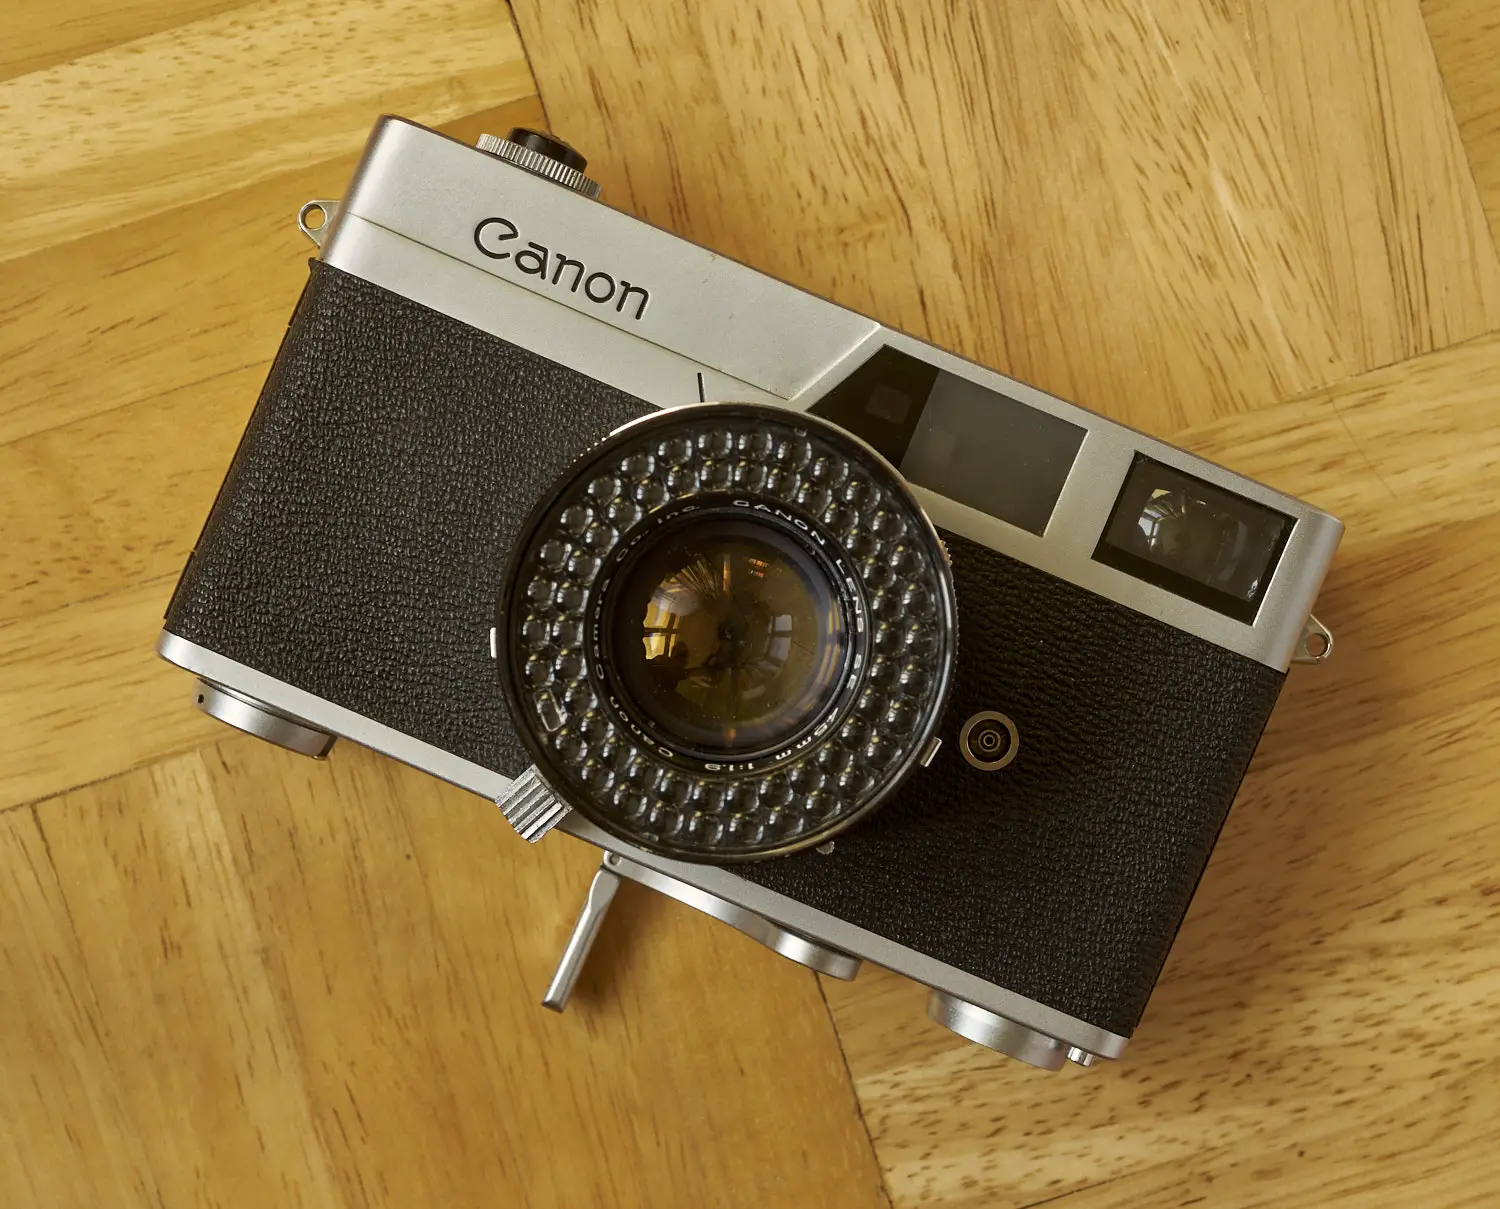 Canonet Review - 43 Years in Preparation -By Bob Janes